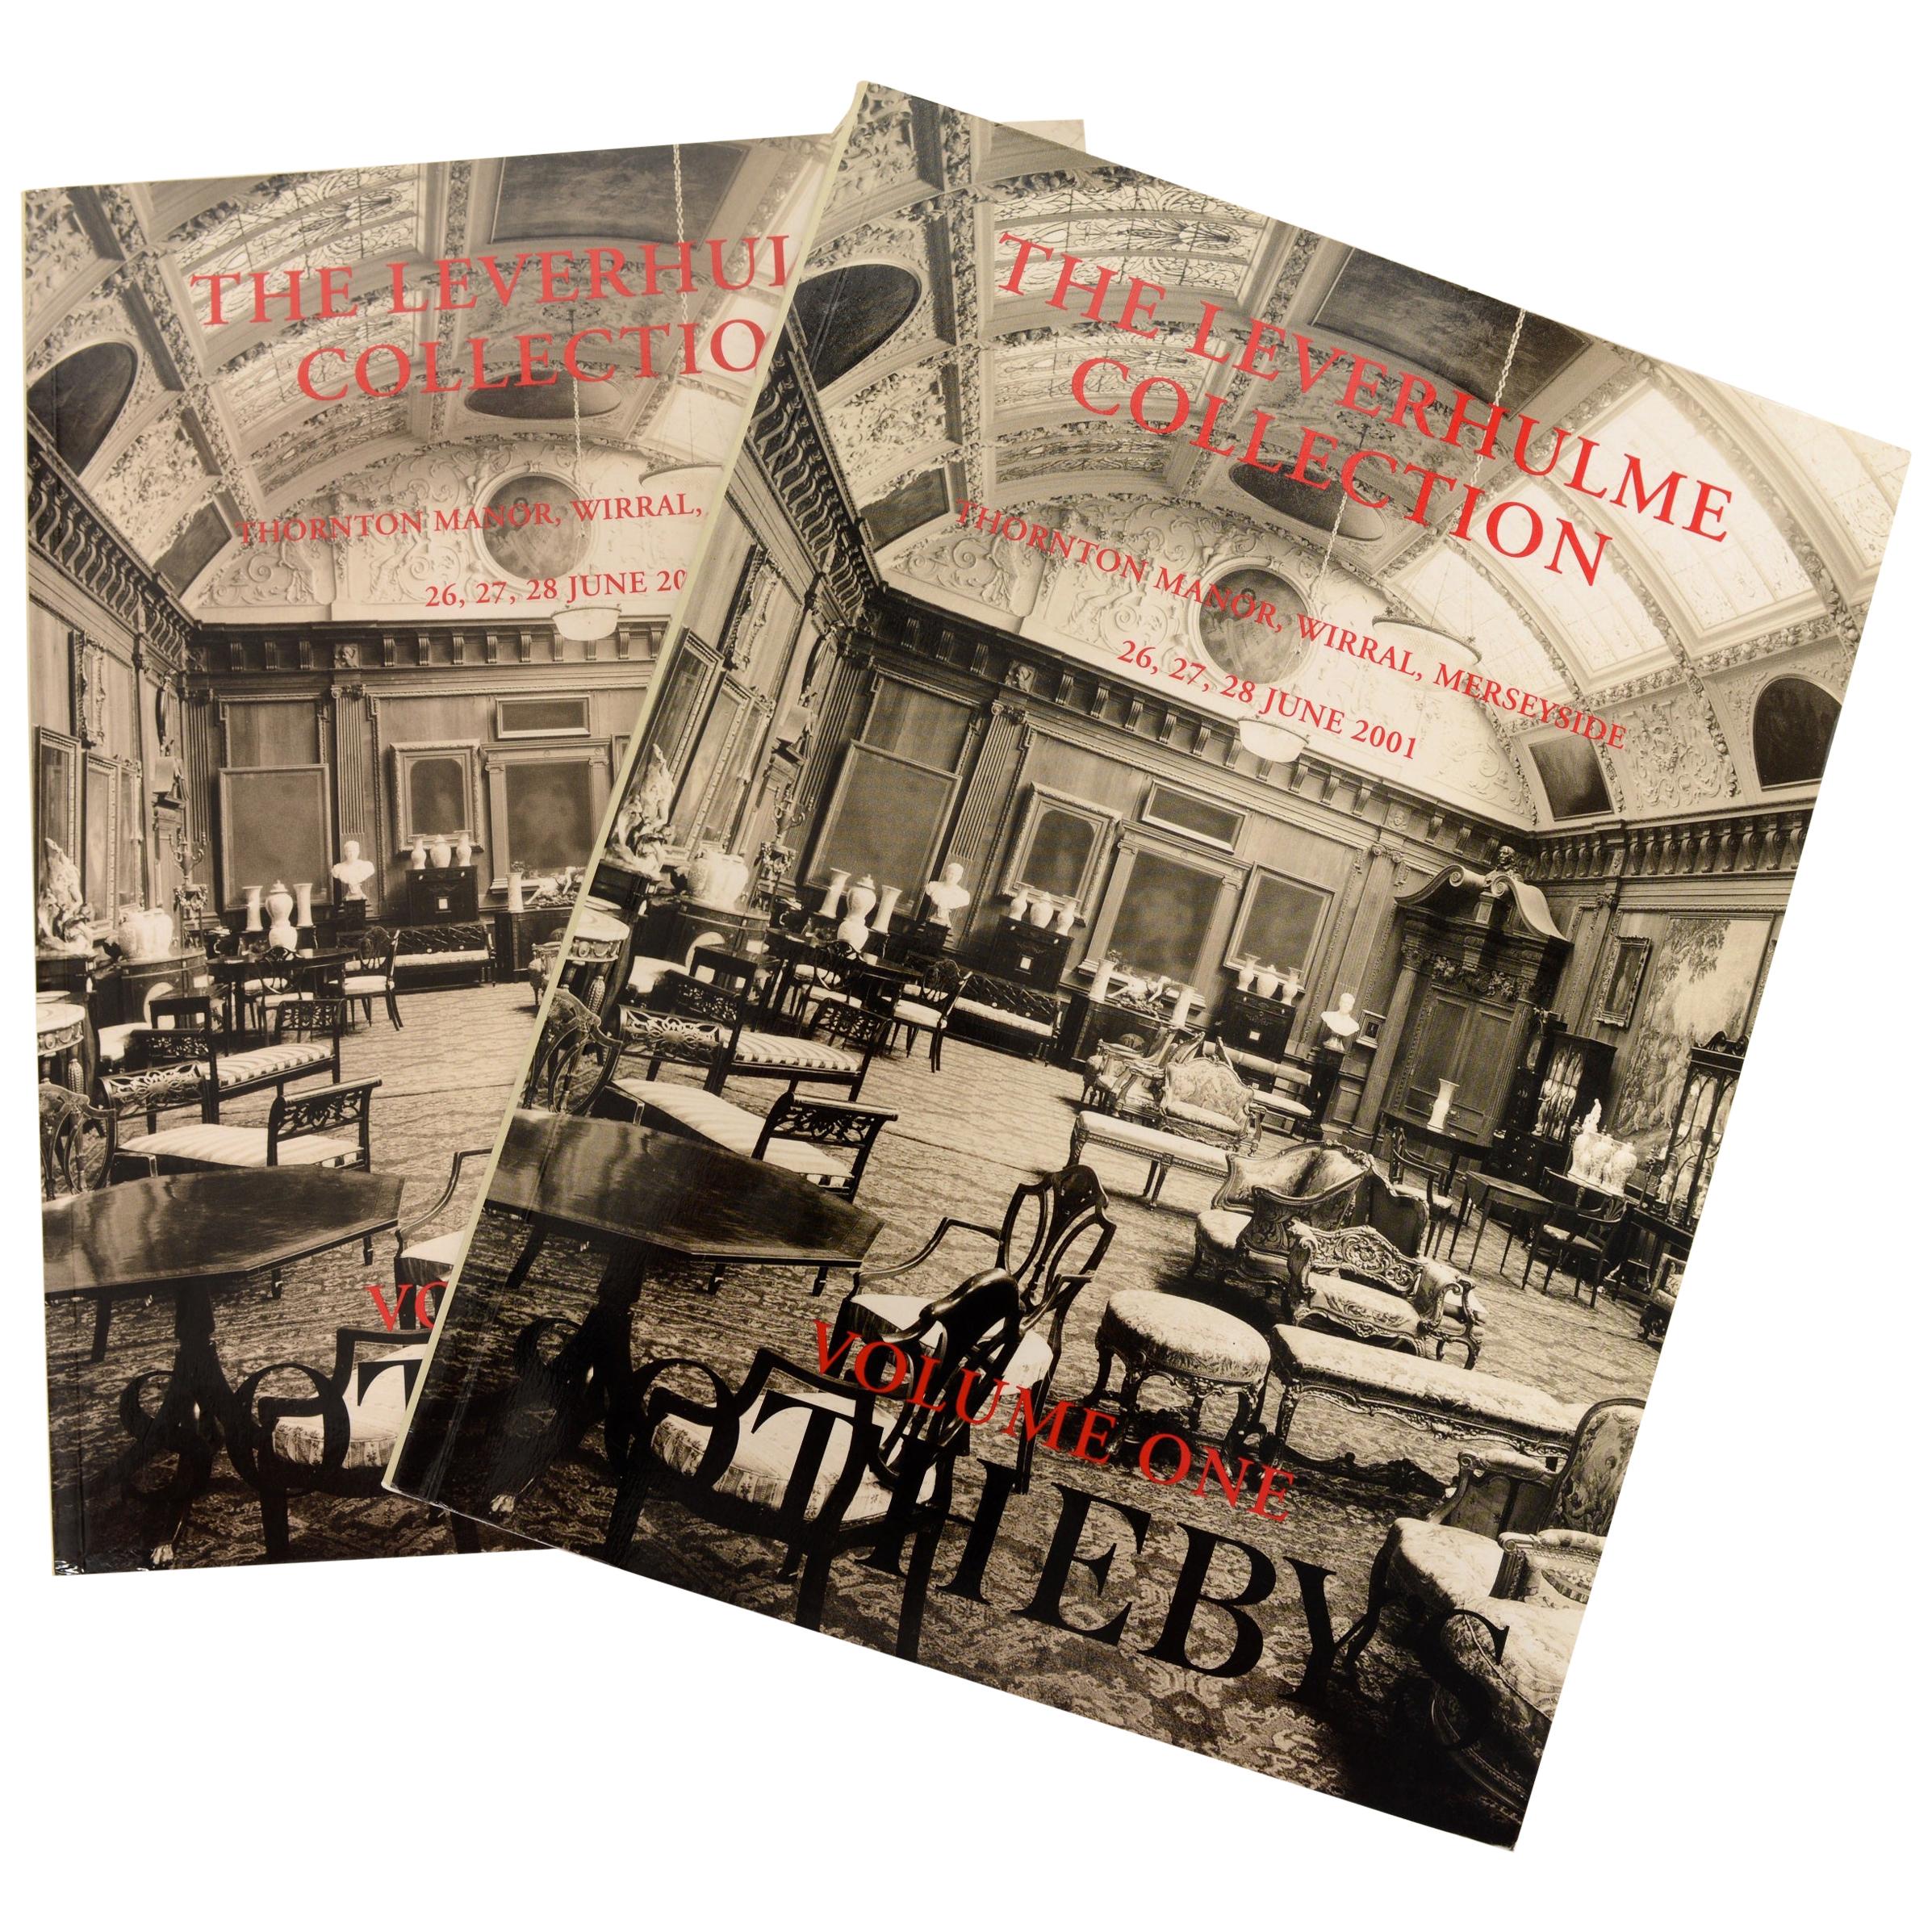 The Leverhulme Collection Thornton Manor, Wirral Merseyside, Vol. 1 et 2